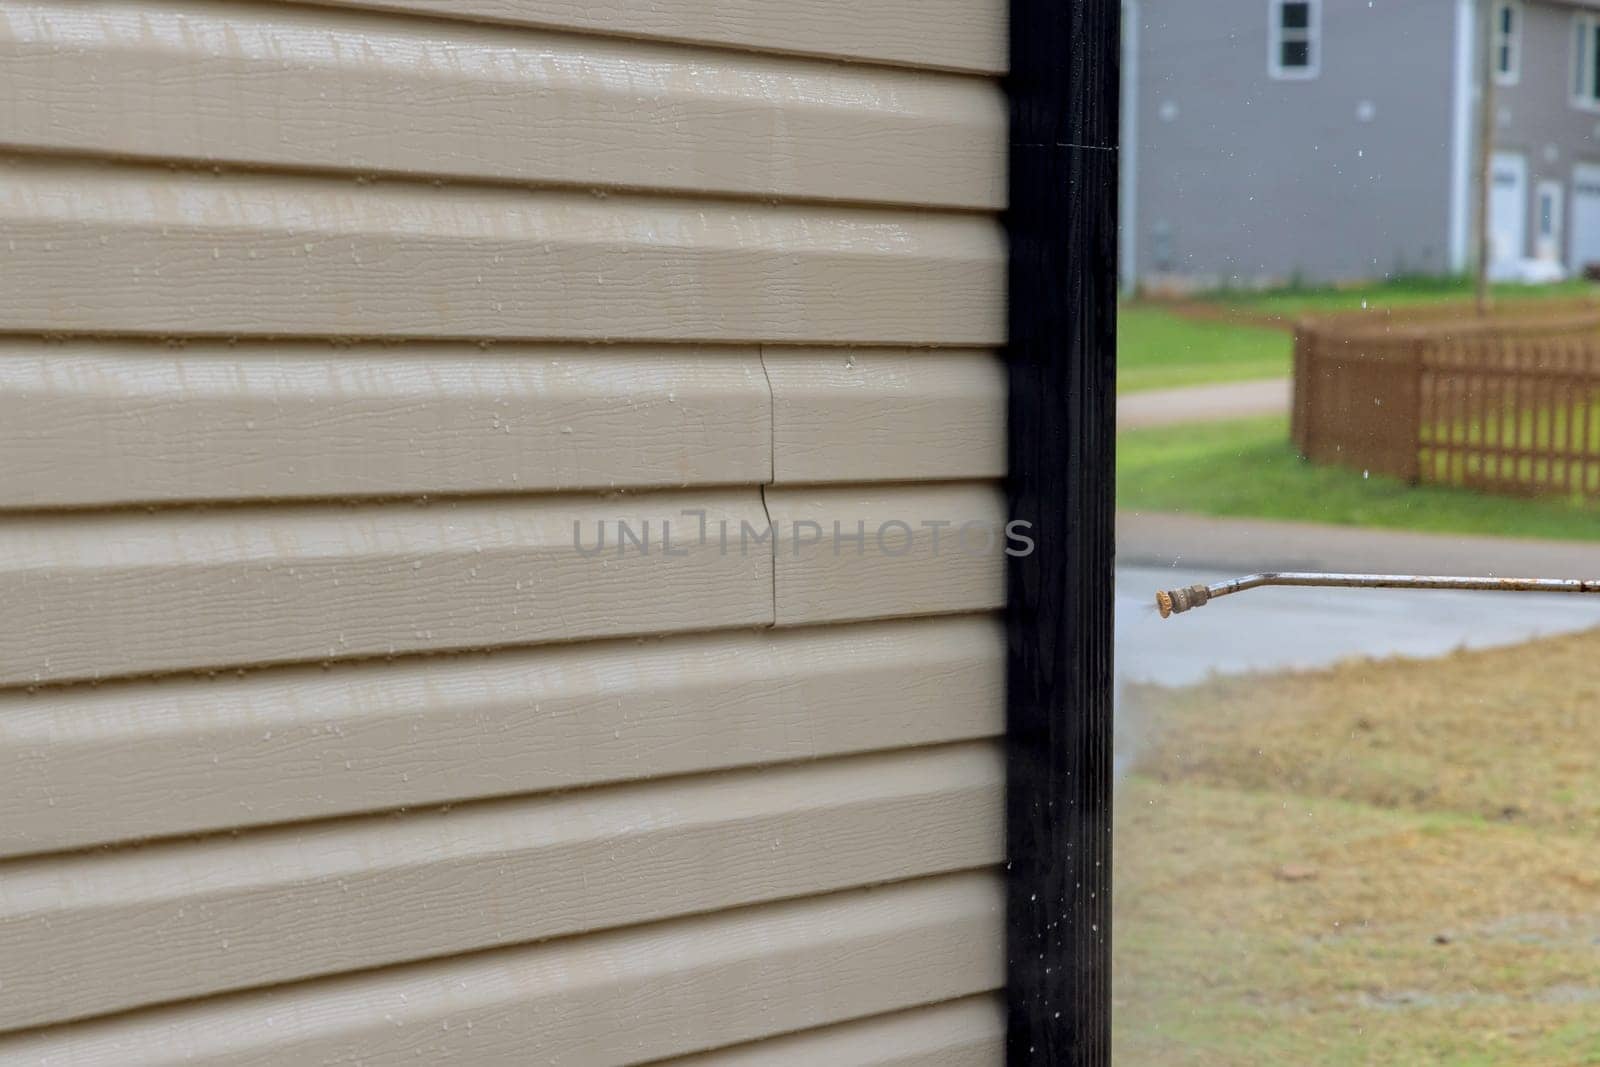 High pressure nozzles are a power washer tool for washing siding houses with water soap cleaner. by ungvar